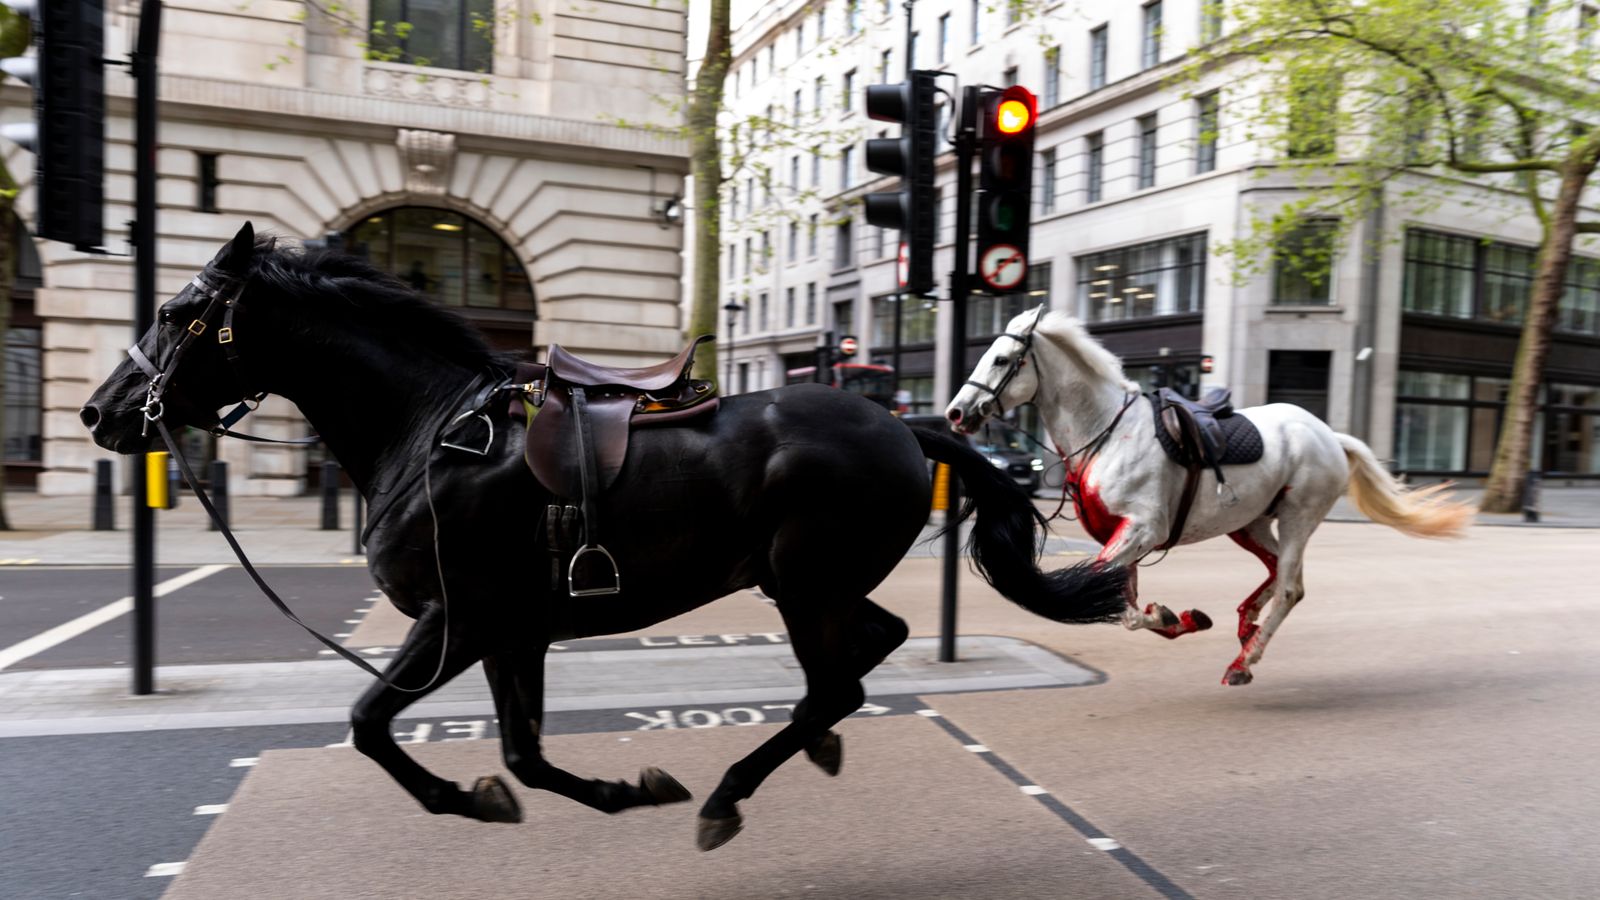 Four people taken to hospital after military horses bolt through central London